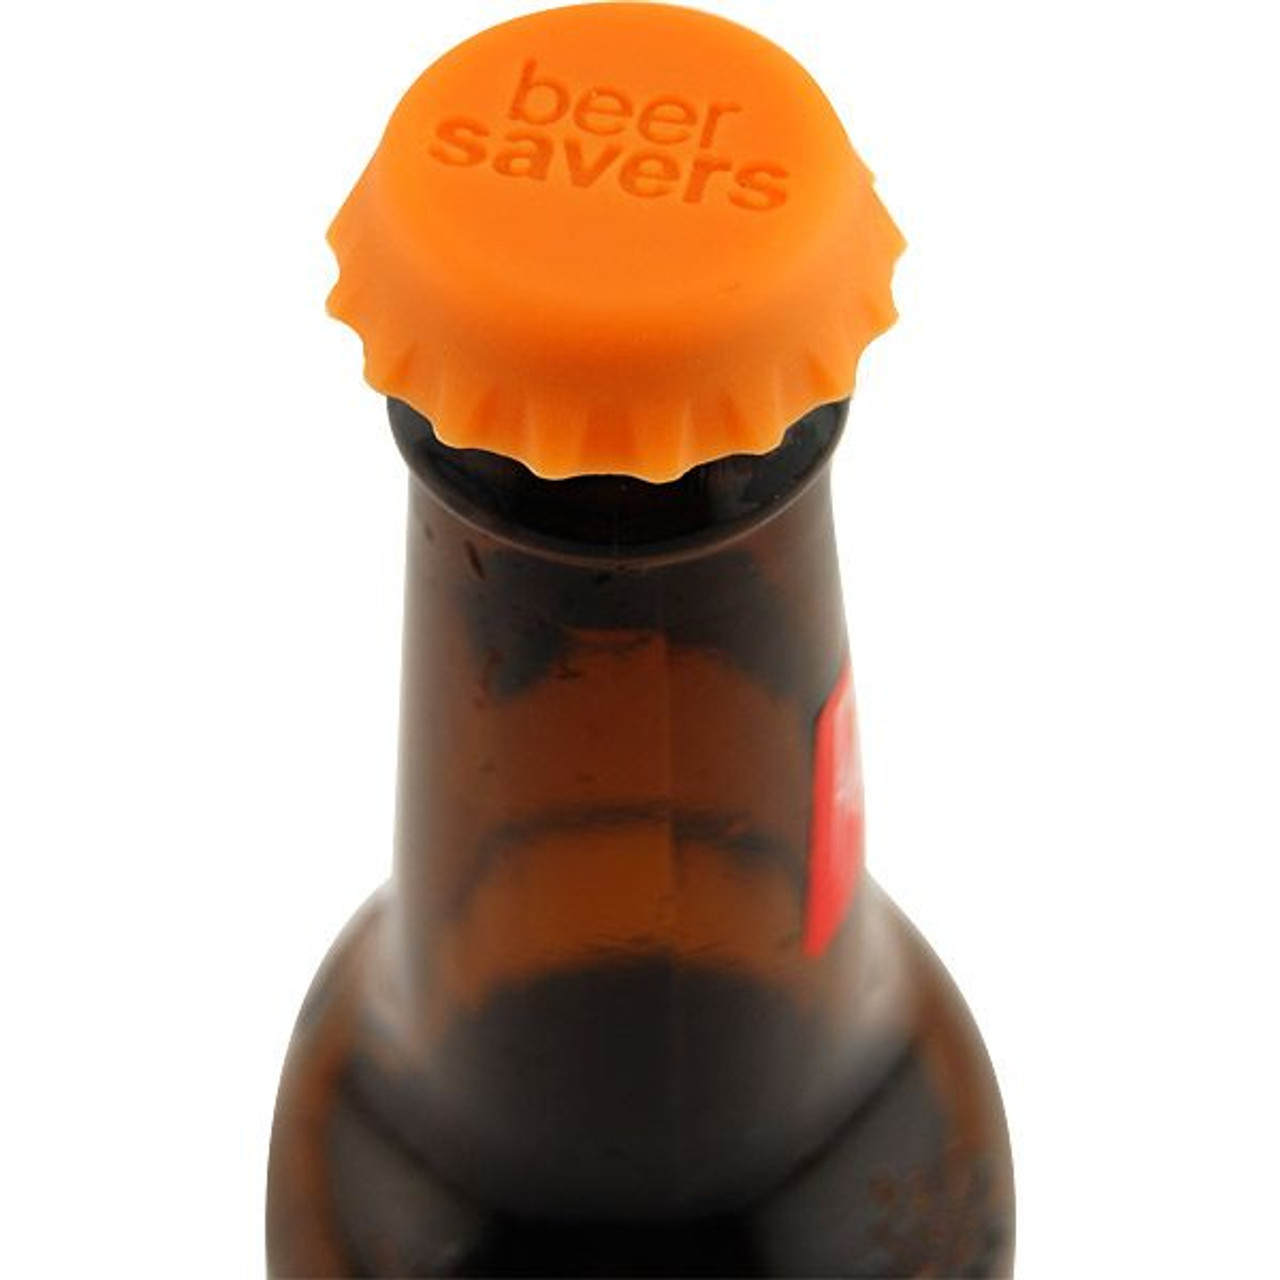 Reusable Silicone Beer Wine Top Drink Caps Stopper Bottle Savers Sealer Be/_zo